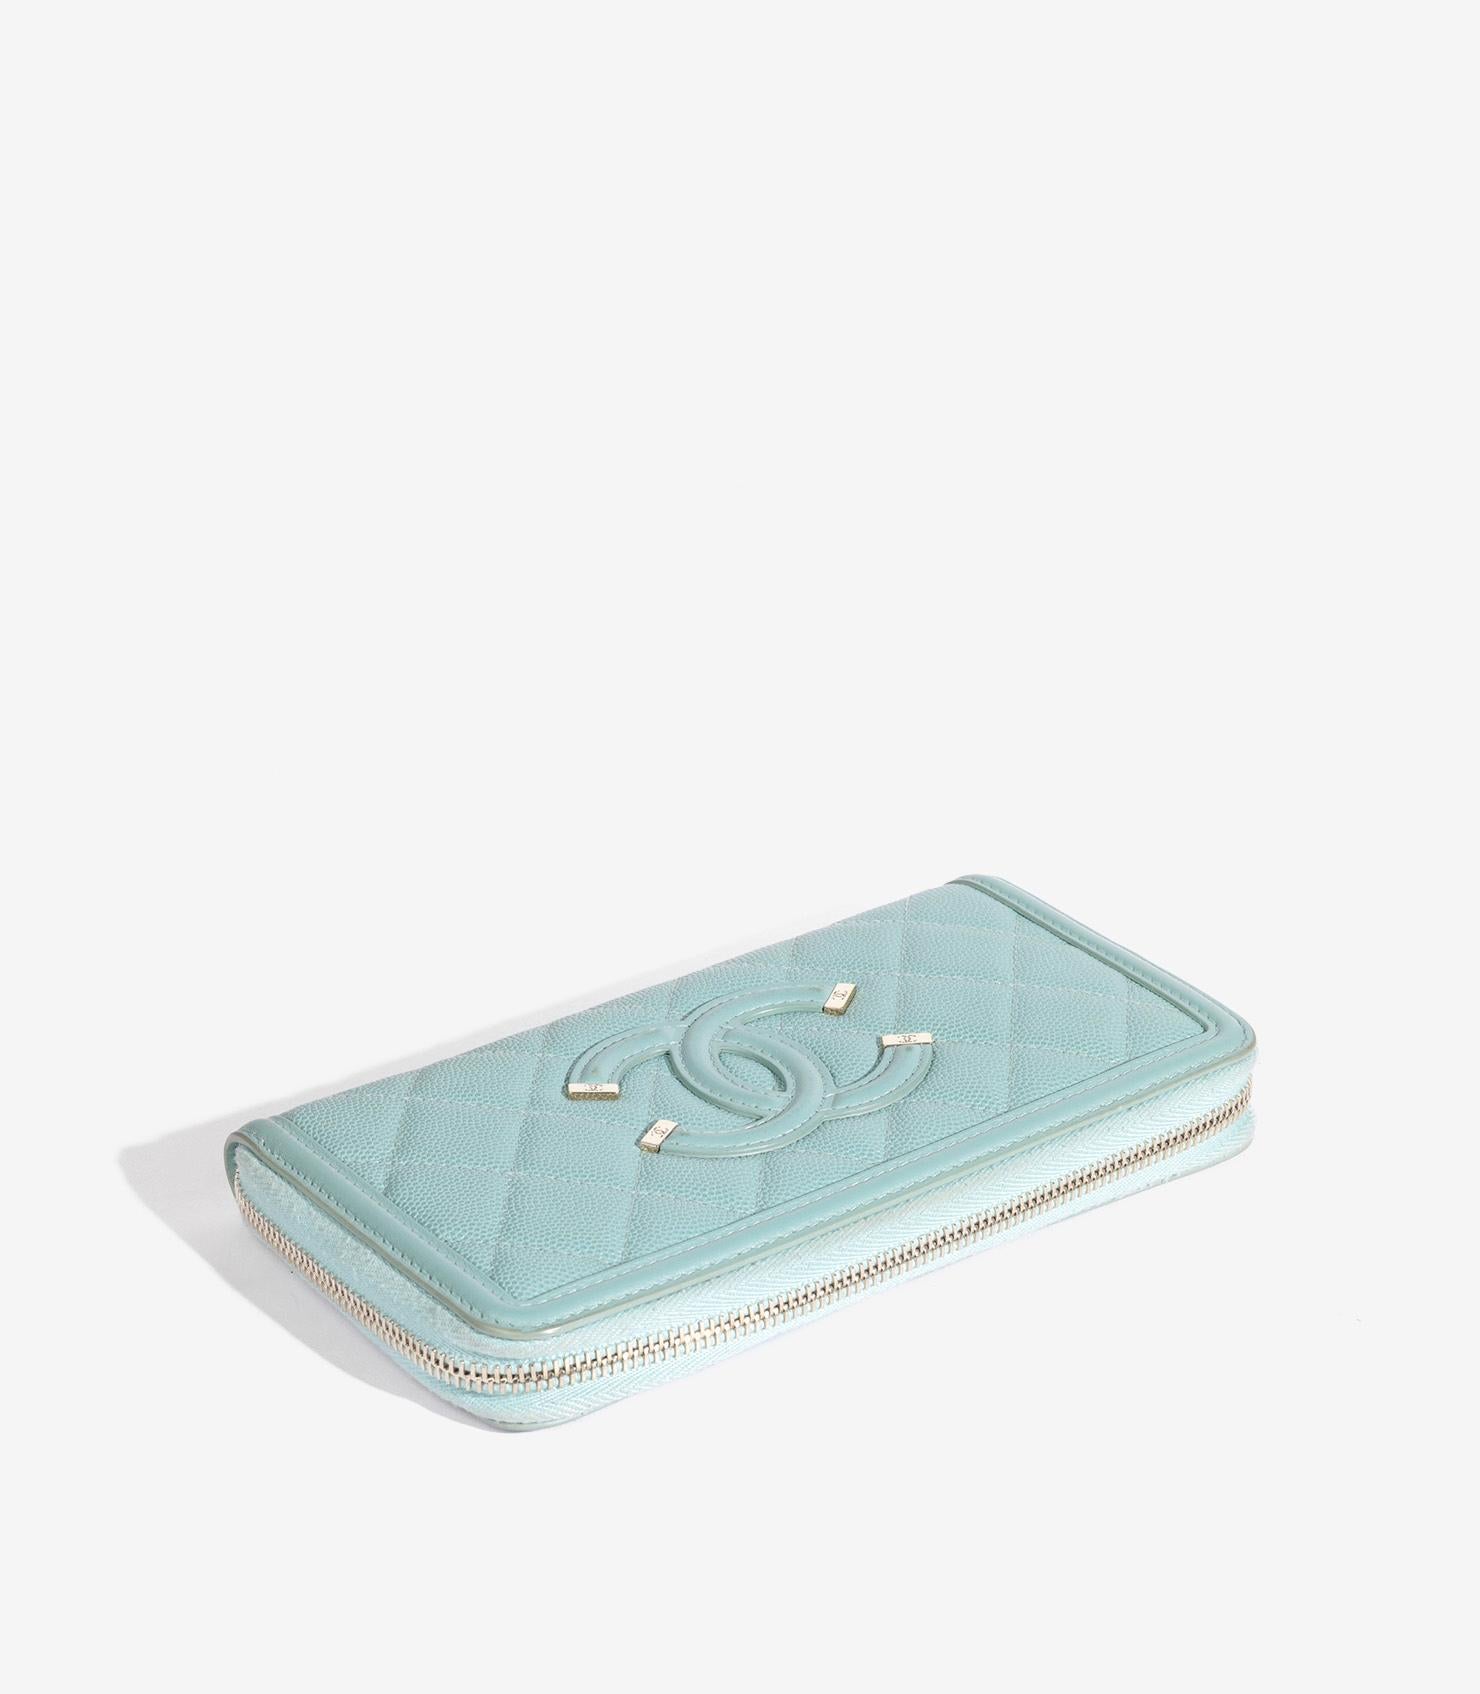 Chanel Light Blue Caviar Quilted Leather CC Filigree Zip Wallet

Brand -Chanel
Model- CC Filigree Zip Wallet
Product Type- Wallet
Serial Number- 29******
Age- Circa 2019
Accompanied By- Chanel Authenticity Card
Colour- Light Blue
Hardware-